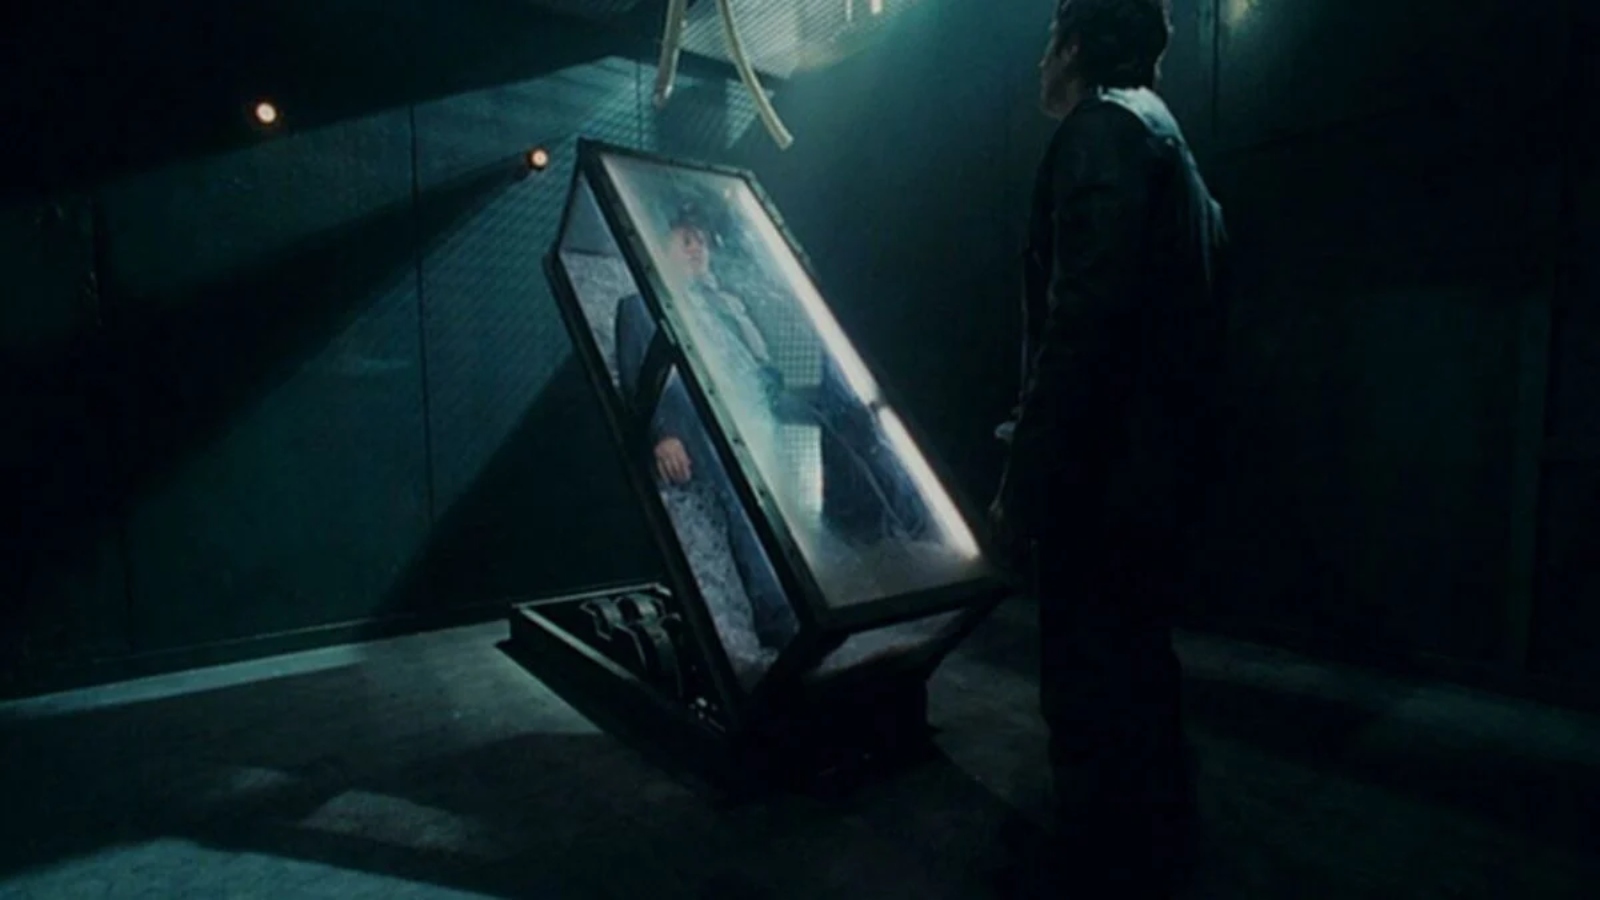 The Glass Coffin Trap from Saw